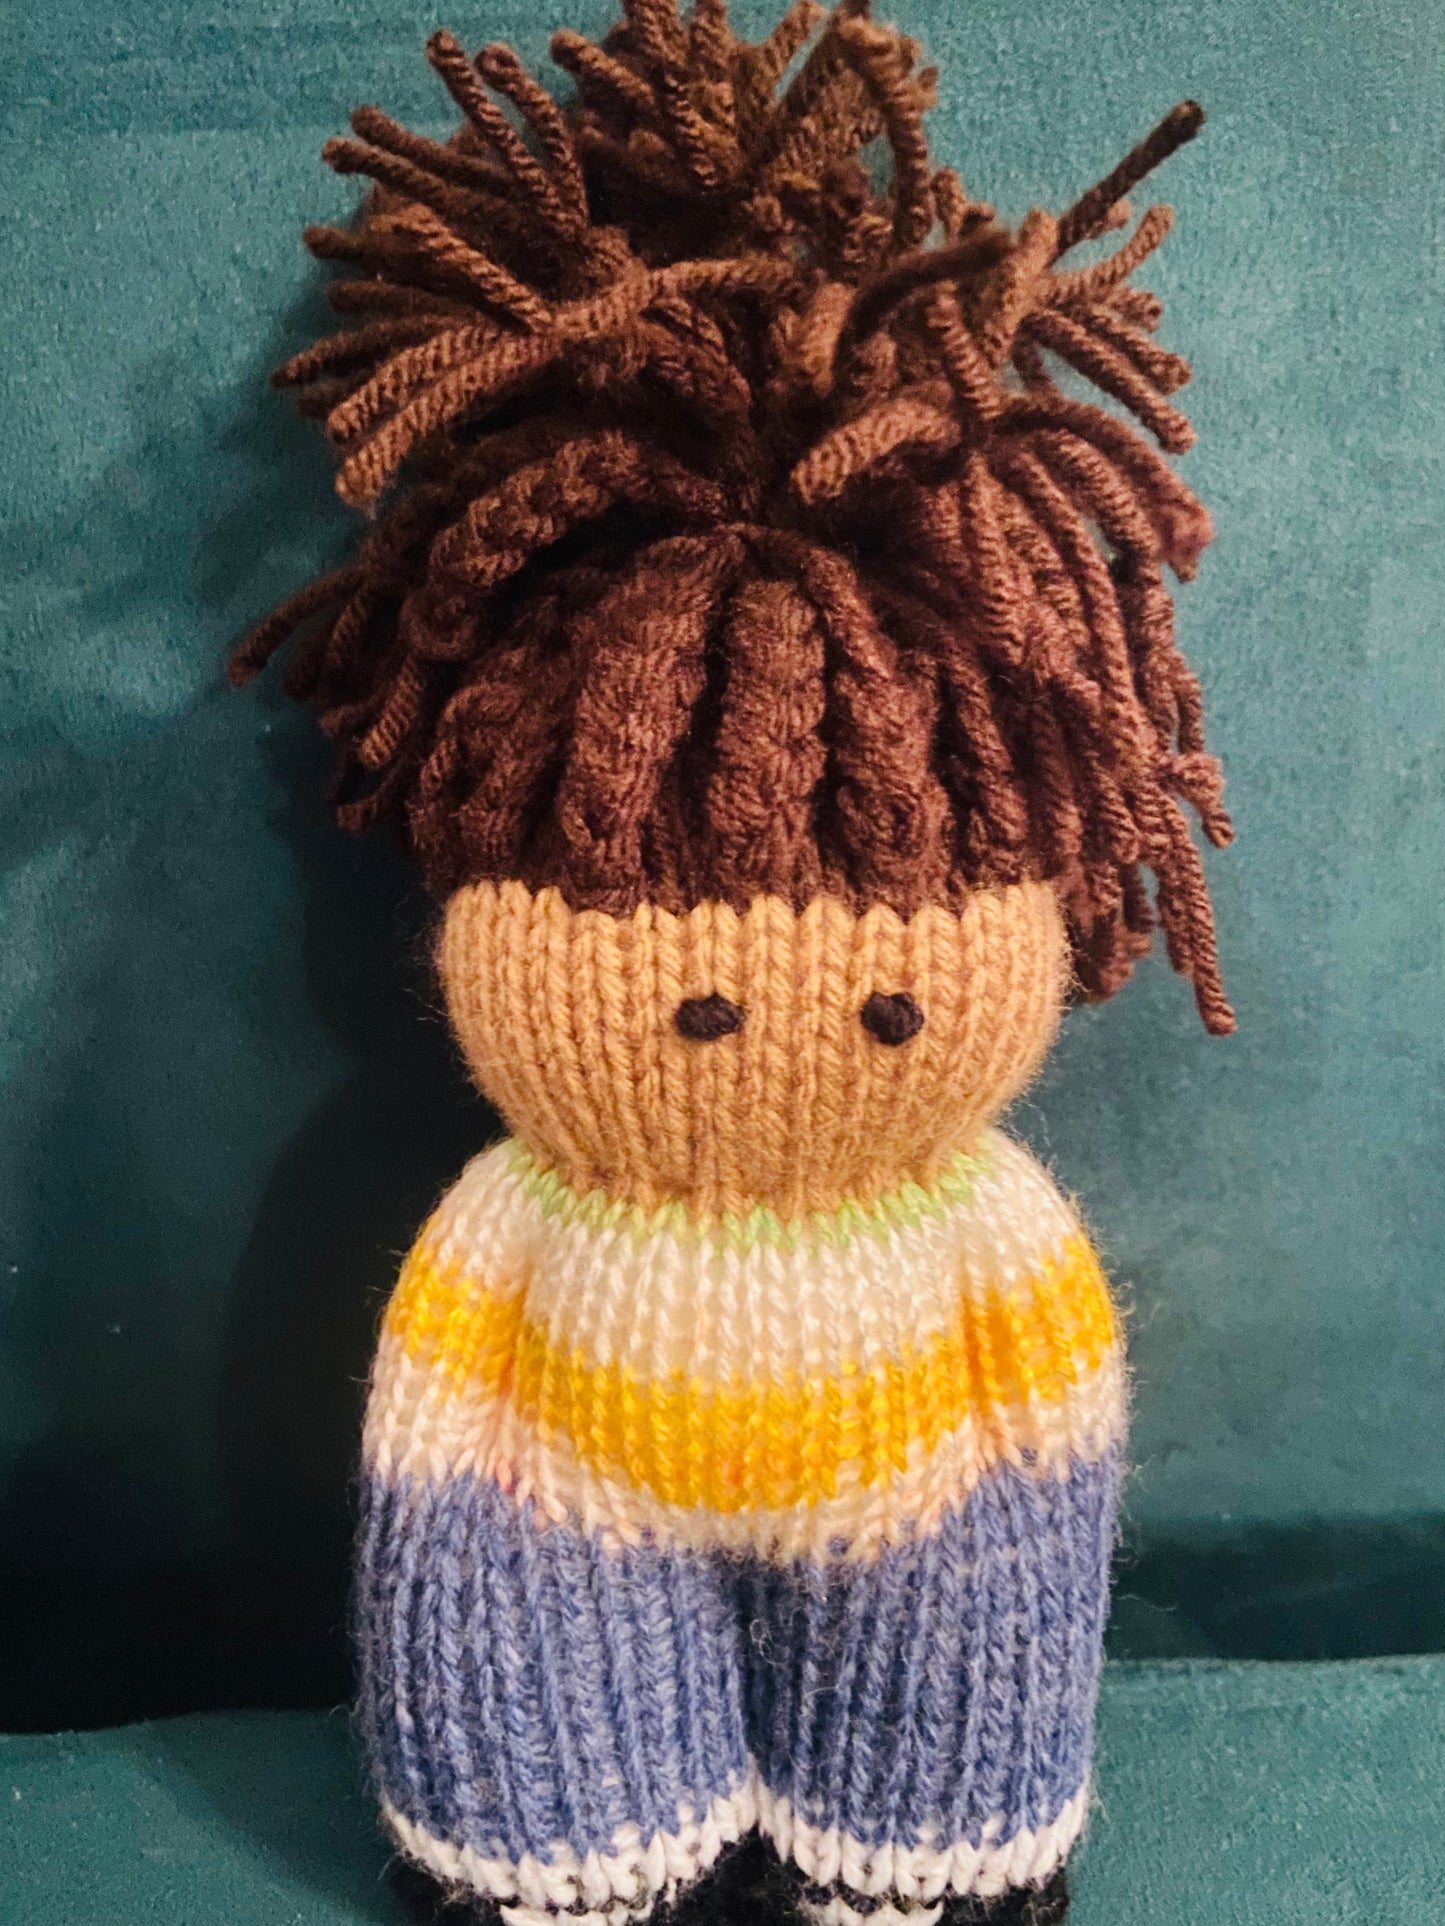 Black knit doll with Locs in top knit with yellow & white sweater + blue pants and shoes